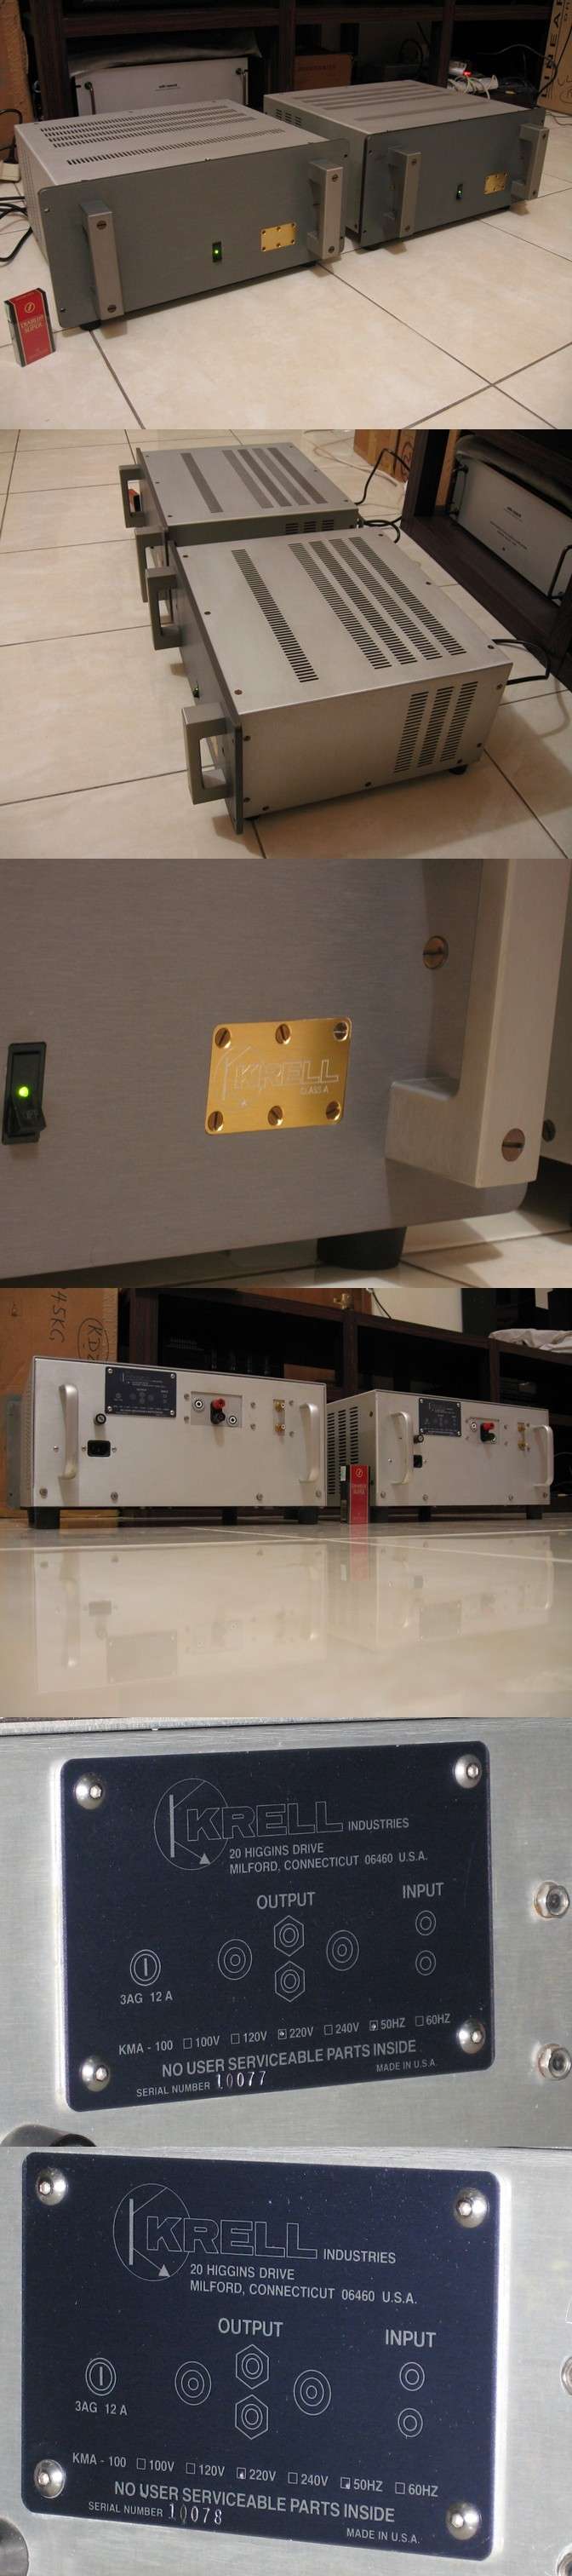 Krell Kbl Kpa Preamp and Kma 100 Monoblock Power Amp Class A (used)  Krell_10